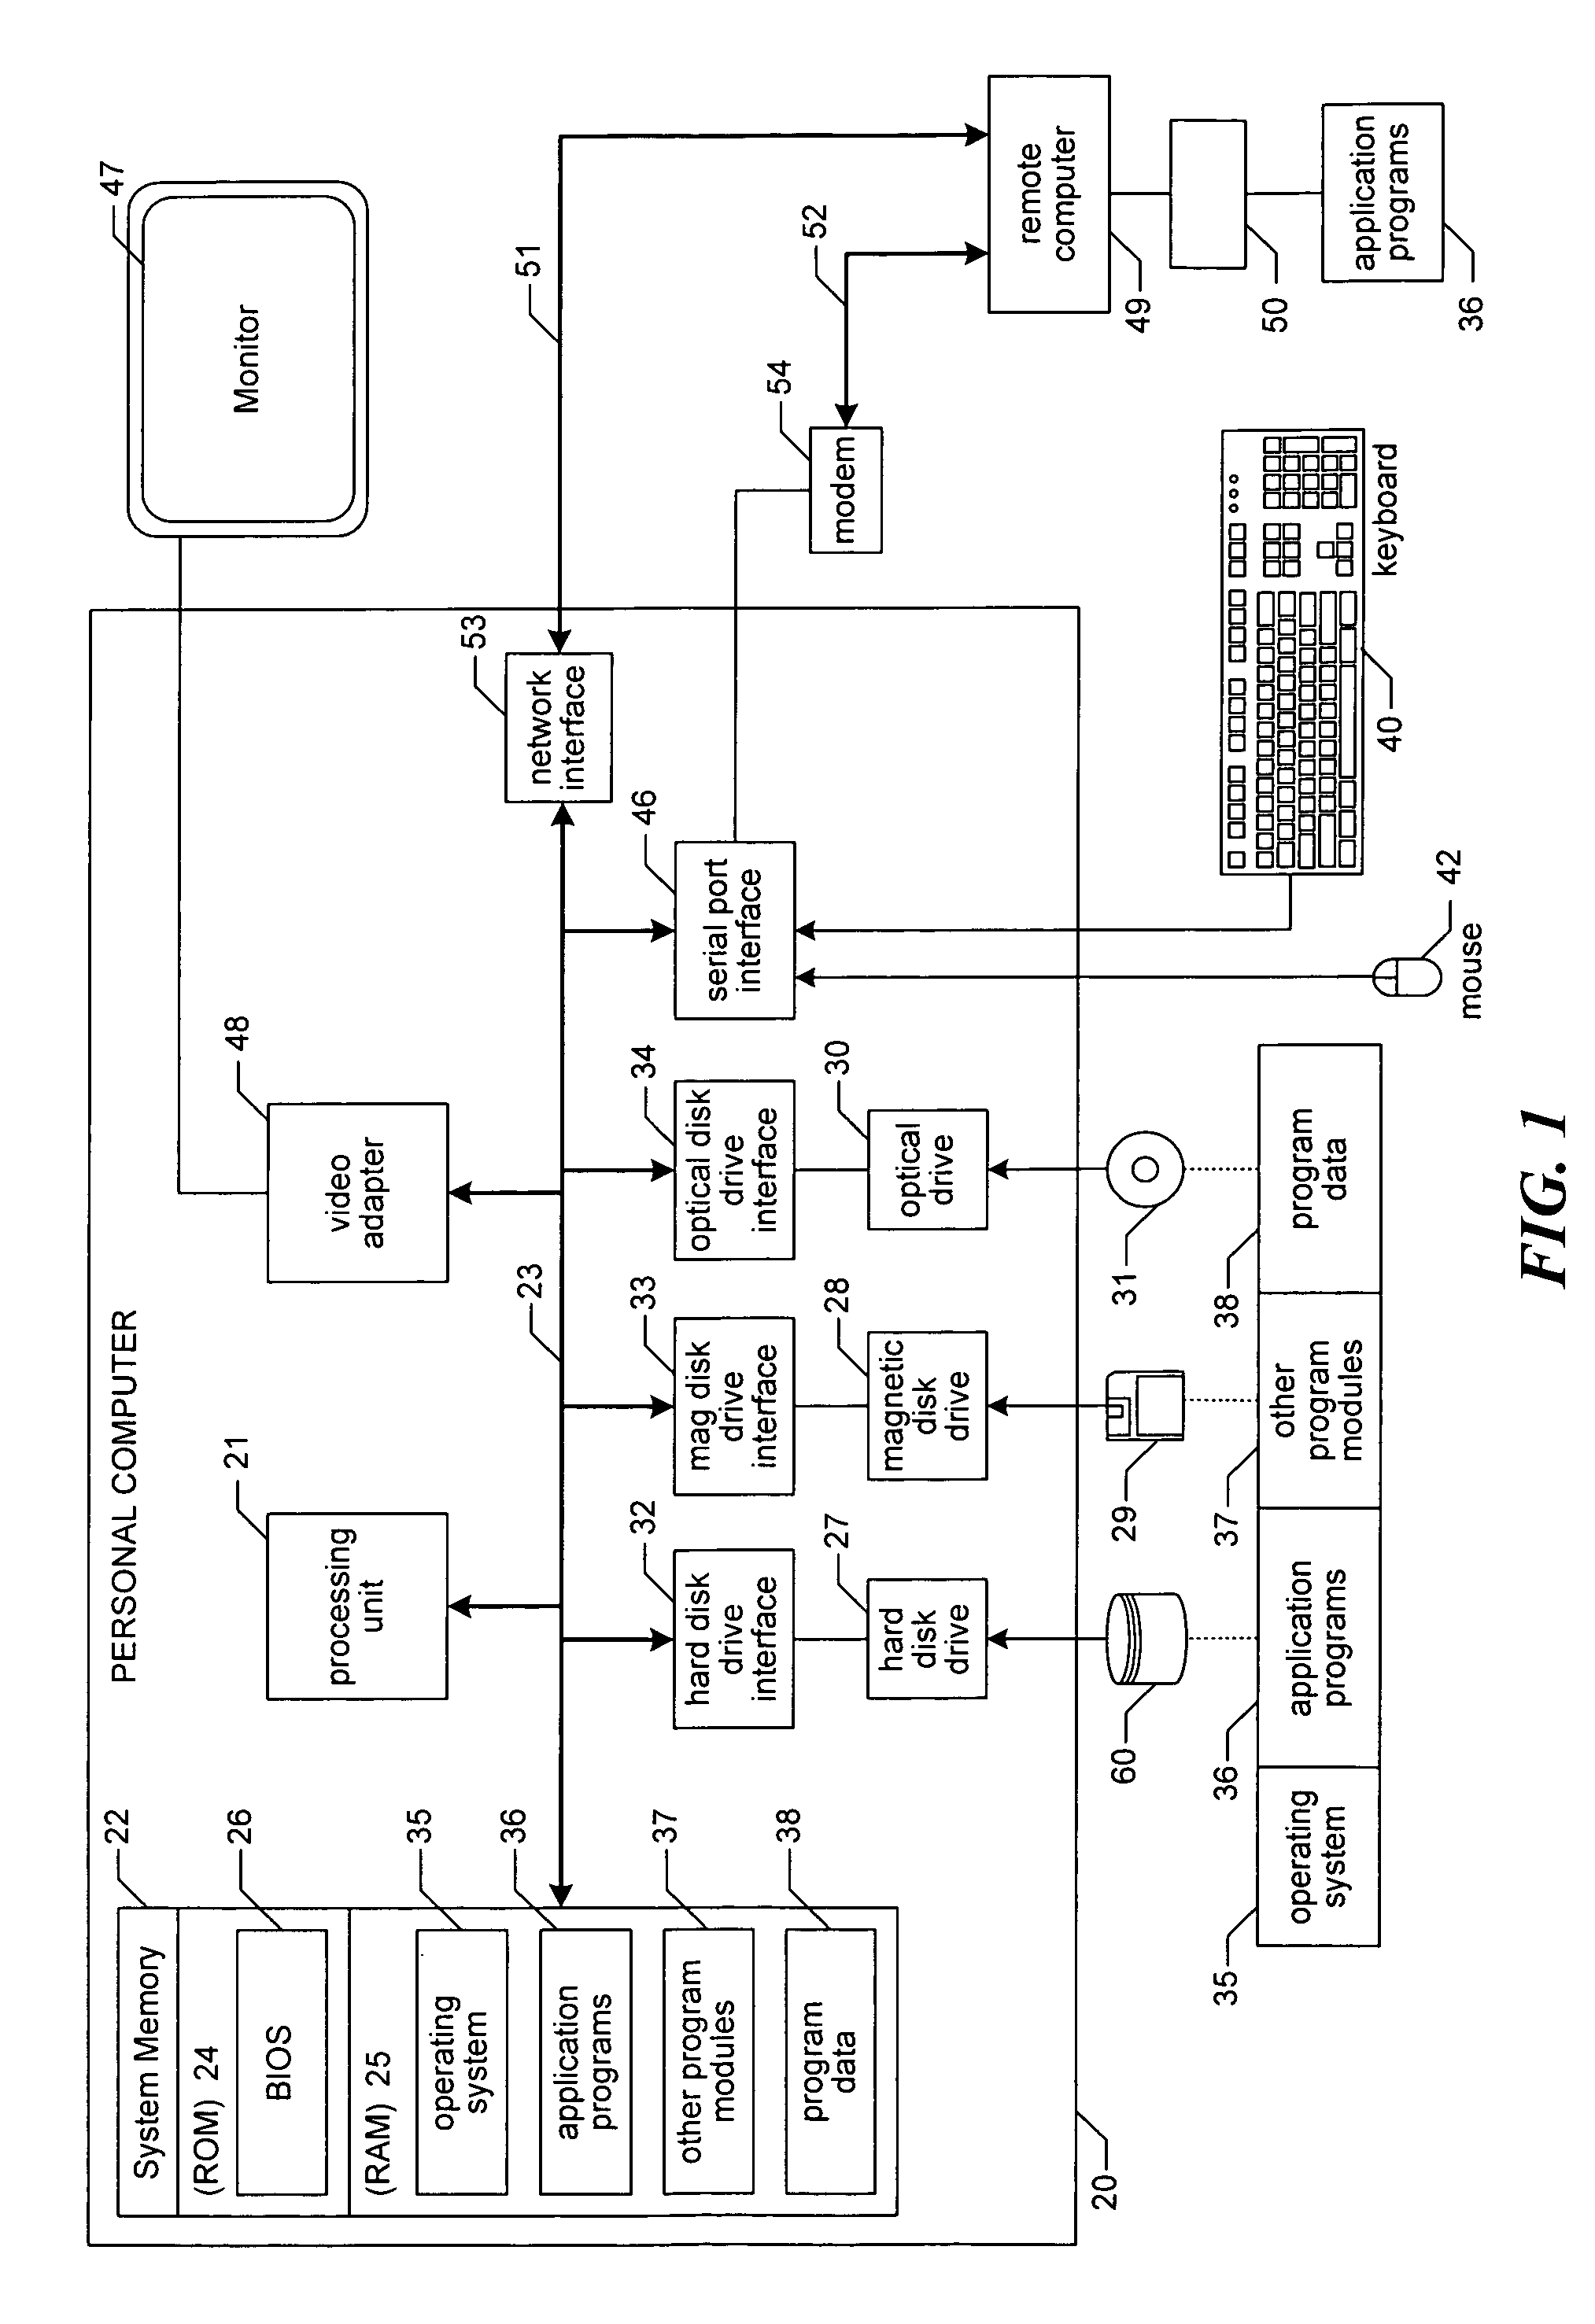 Scalable multiparty conferencing and collaboration system and method of dynamically allocating system resources and providing true color support in same